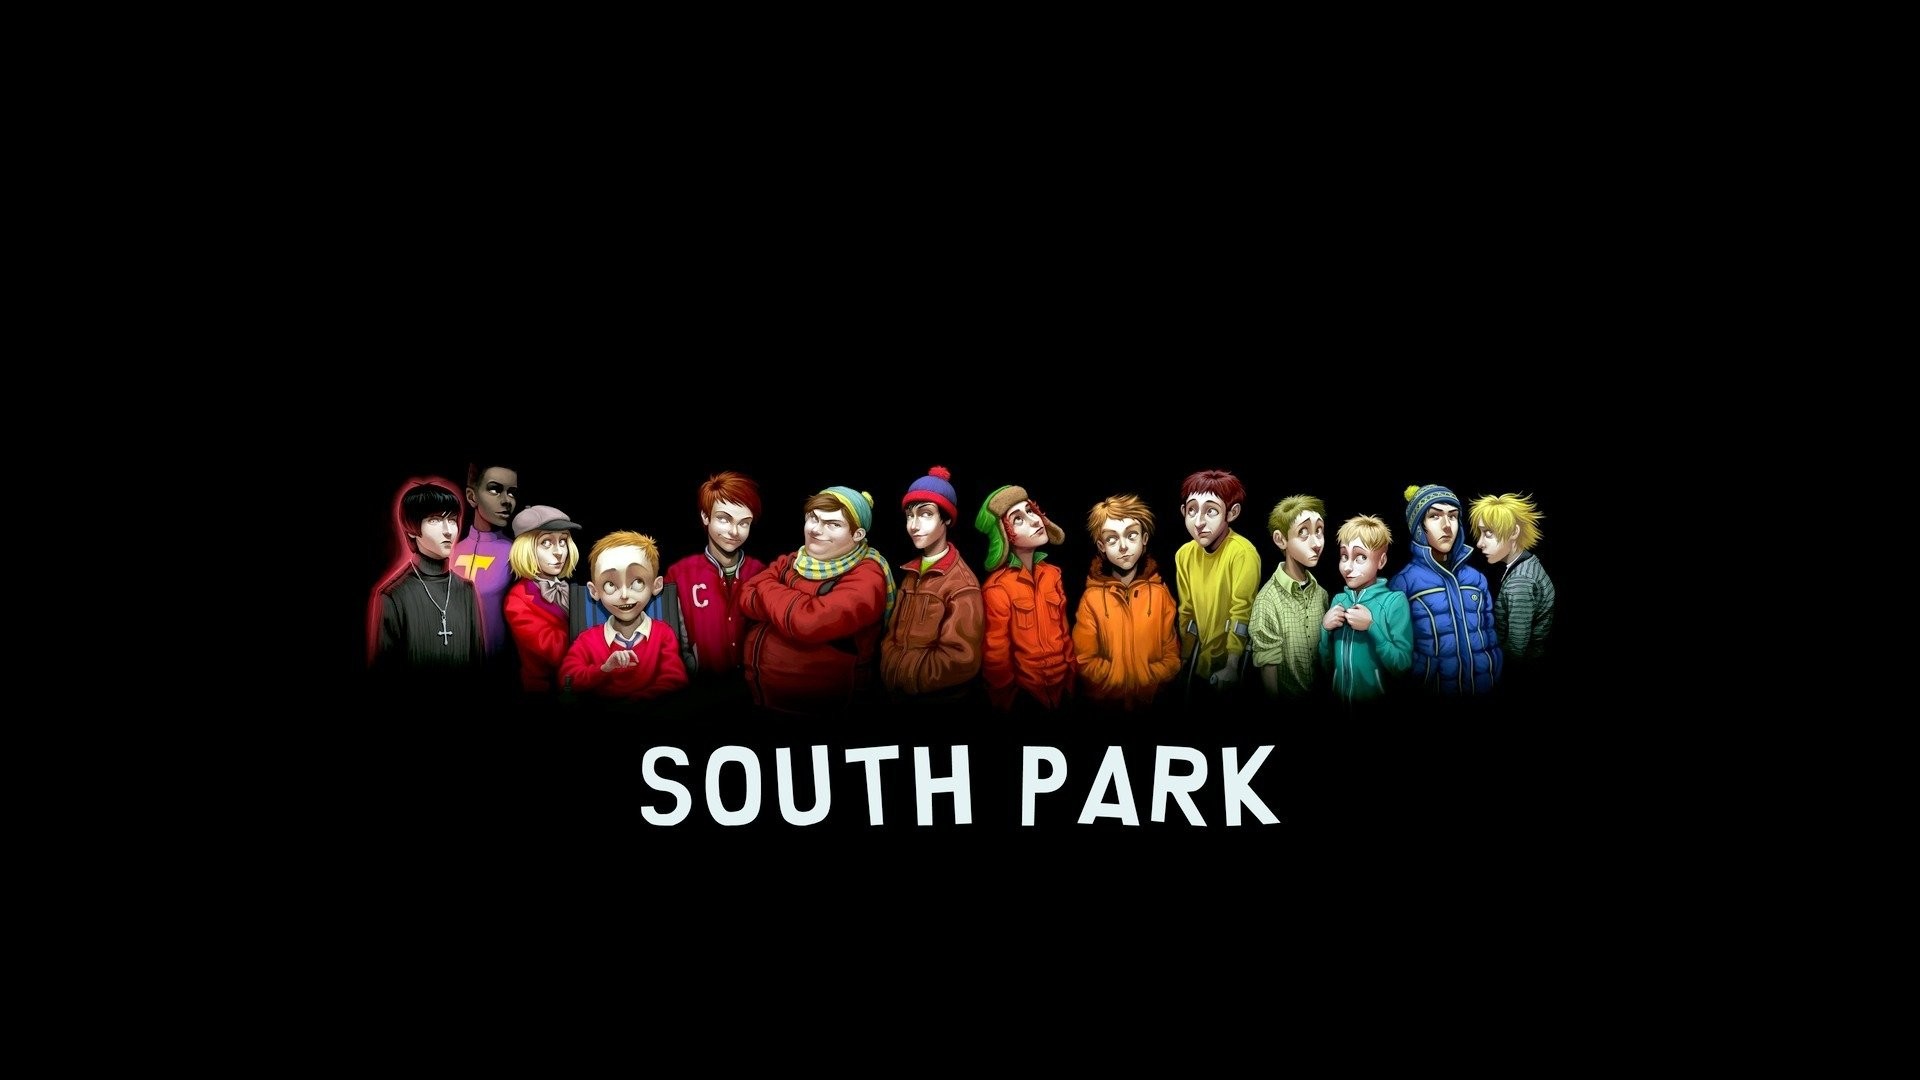 Kenny South Park Wallpaper Image